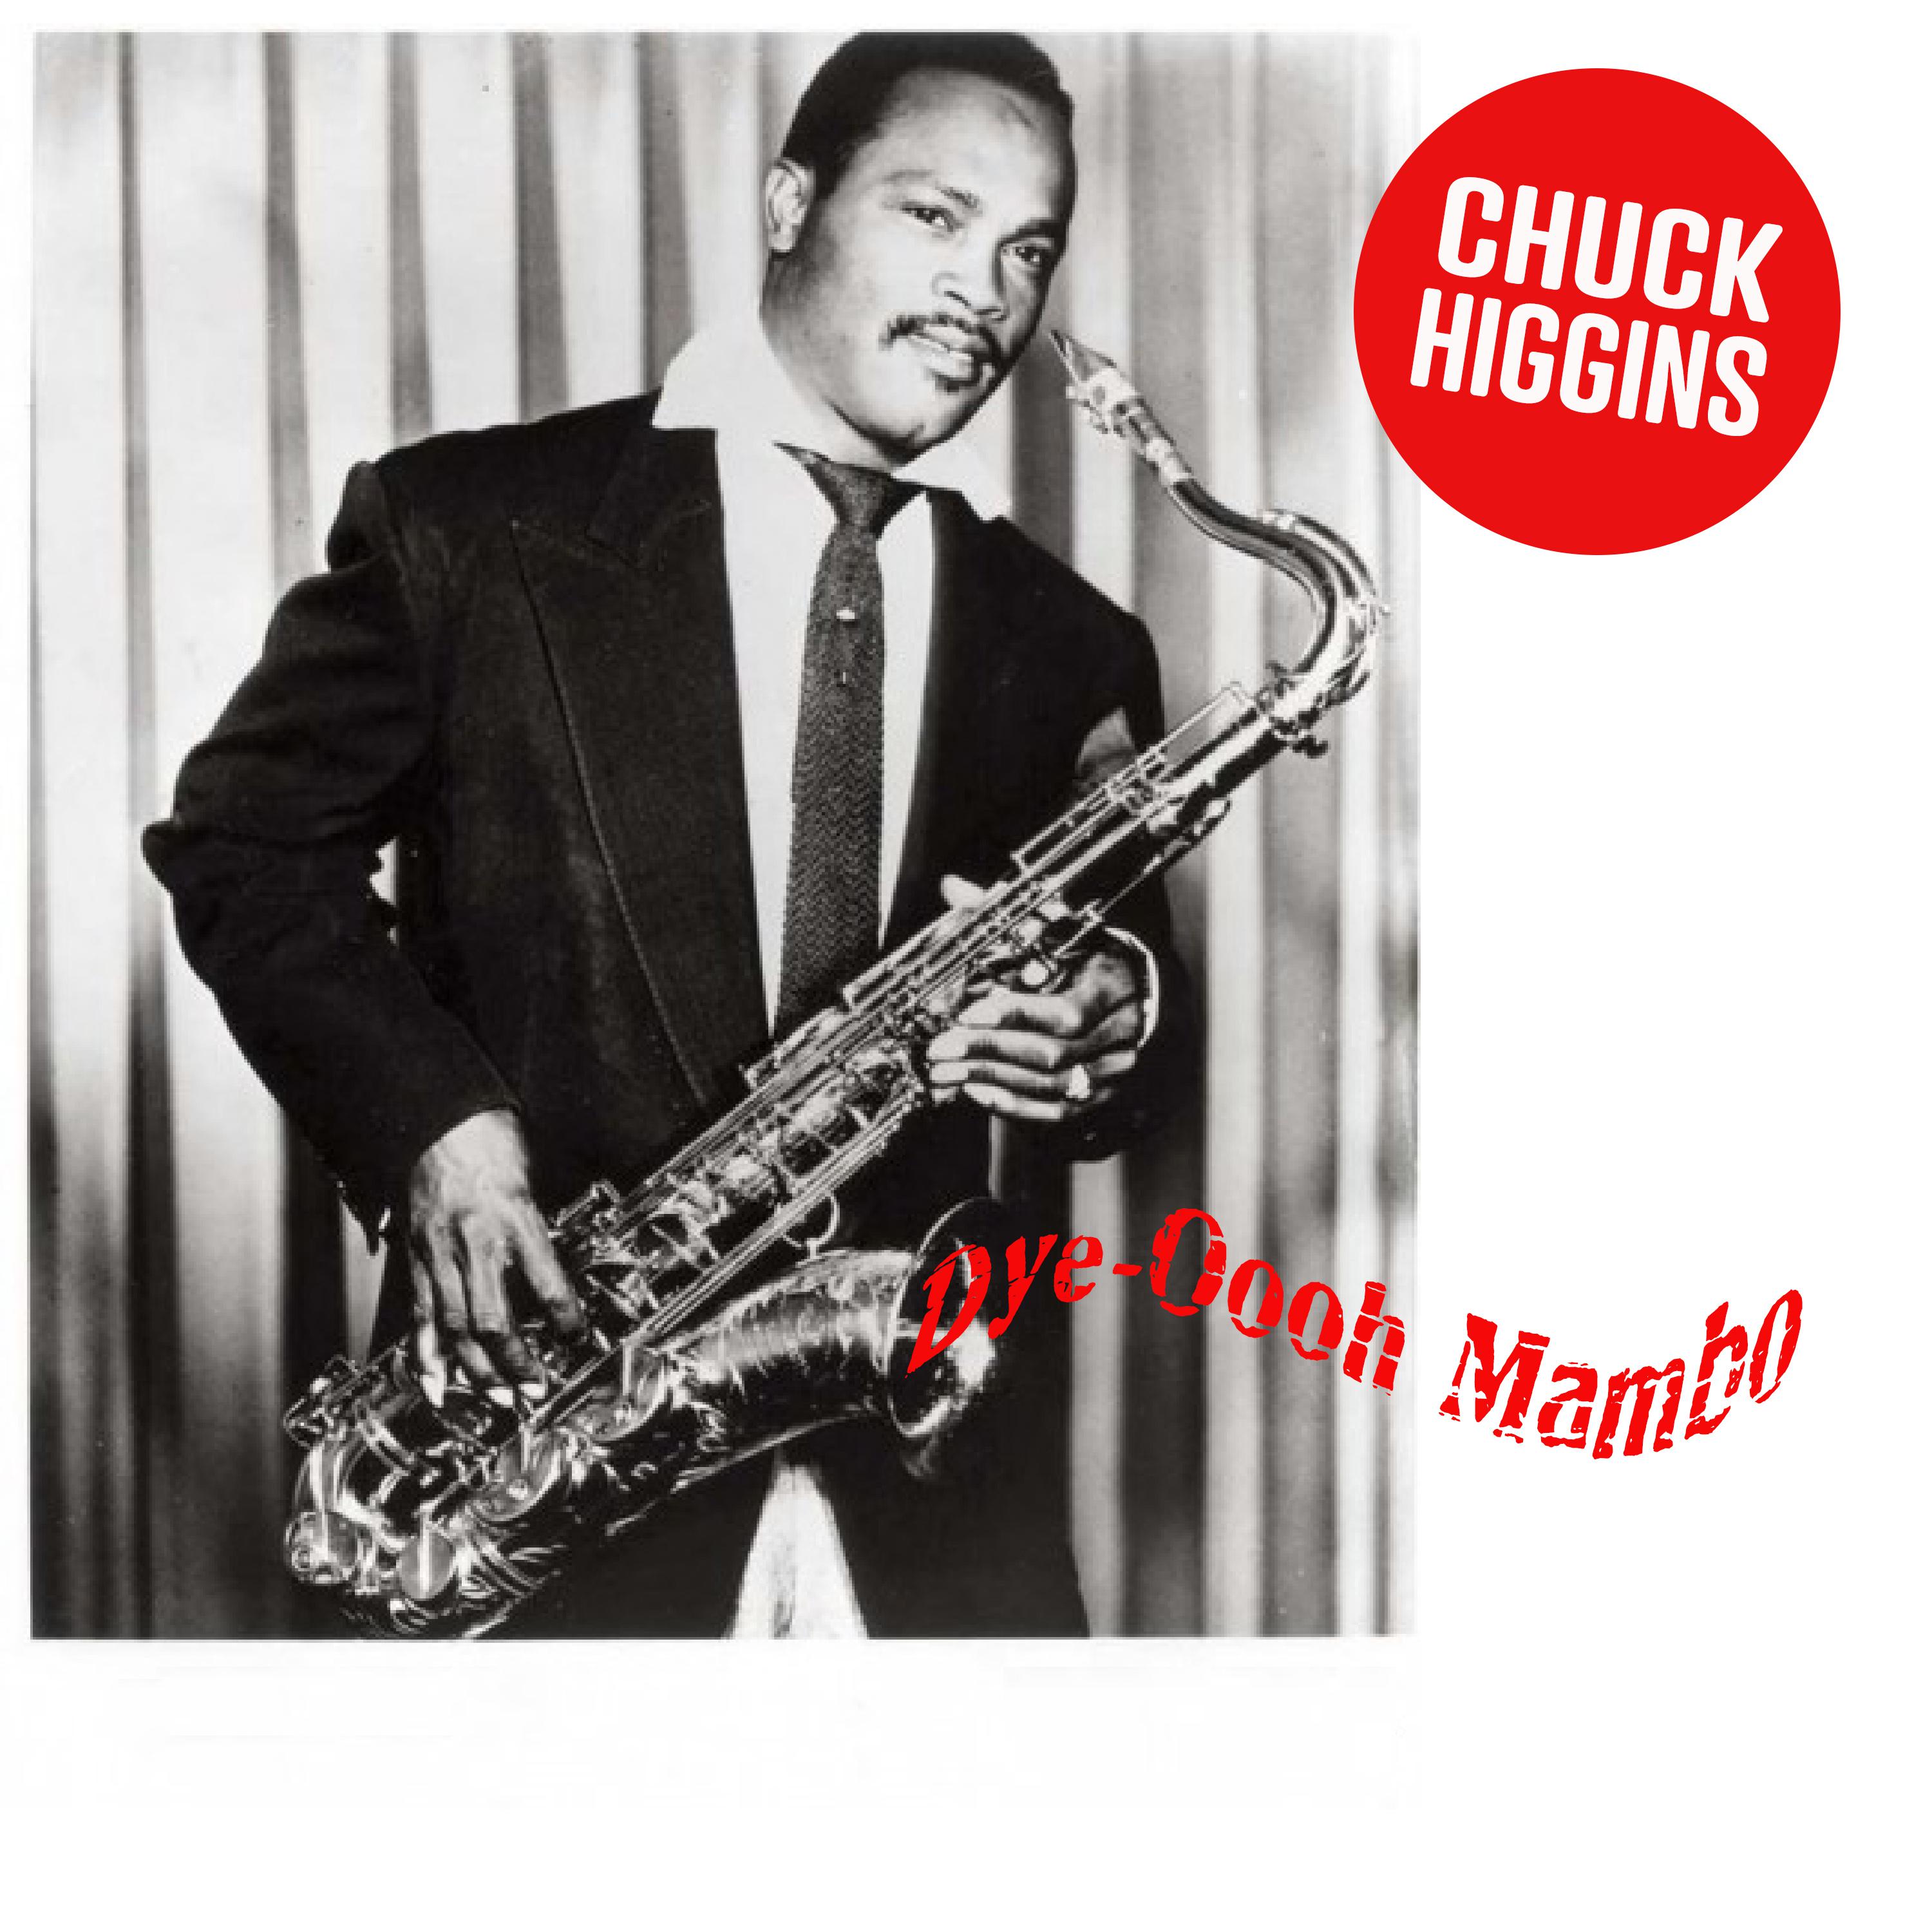 Chuck Higgins - Something's Going on in My Room